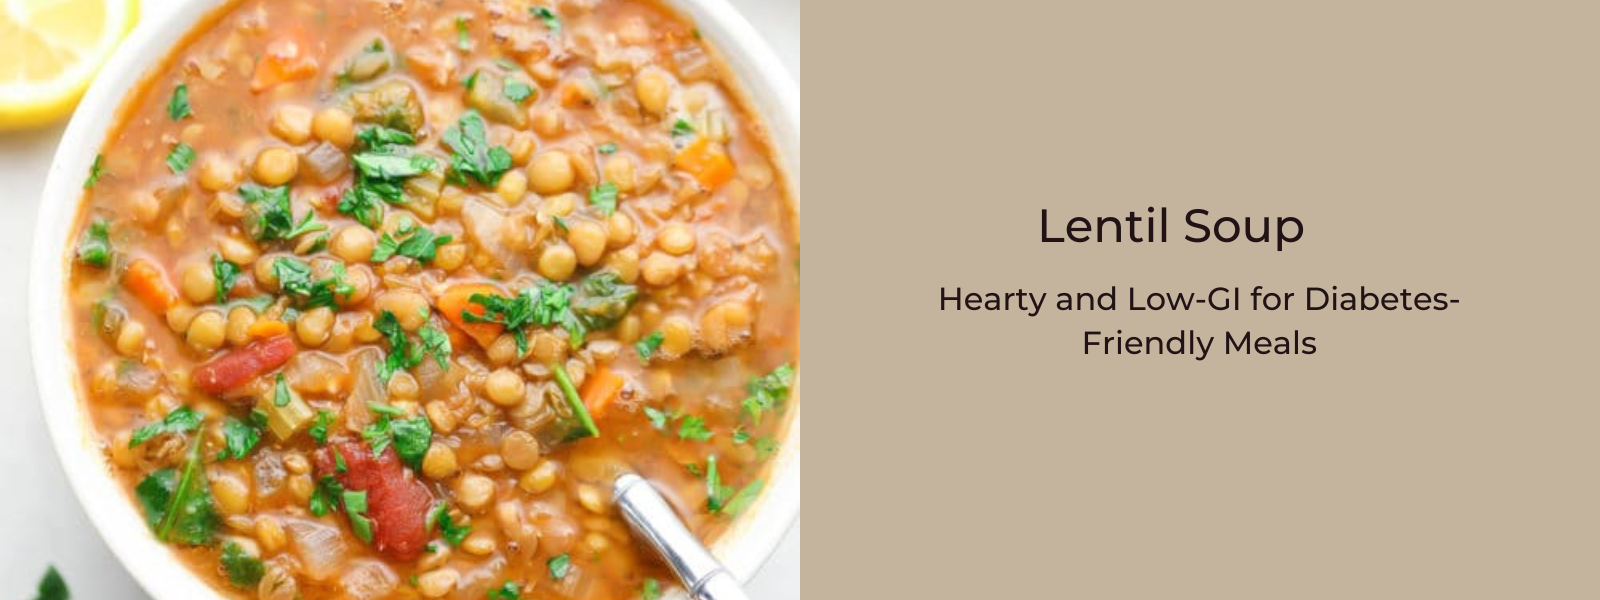 Lentil Soup: Hearty and Low-GI for Diabetes-Friendly Meals